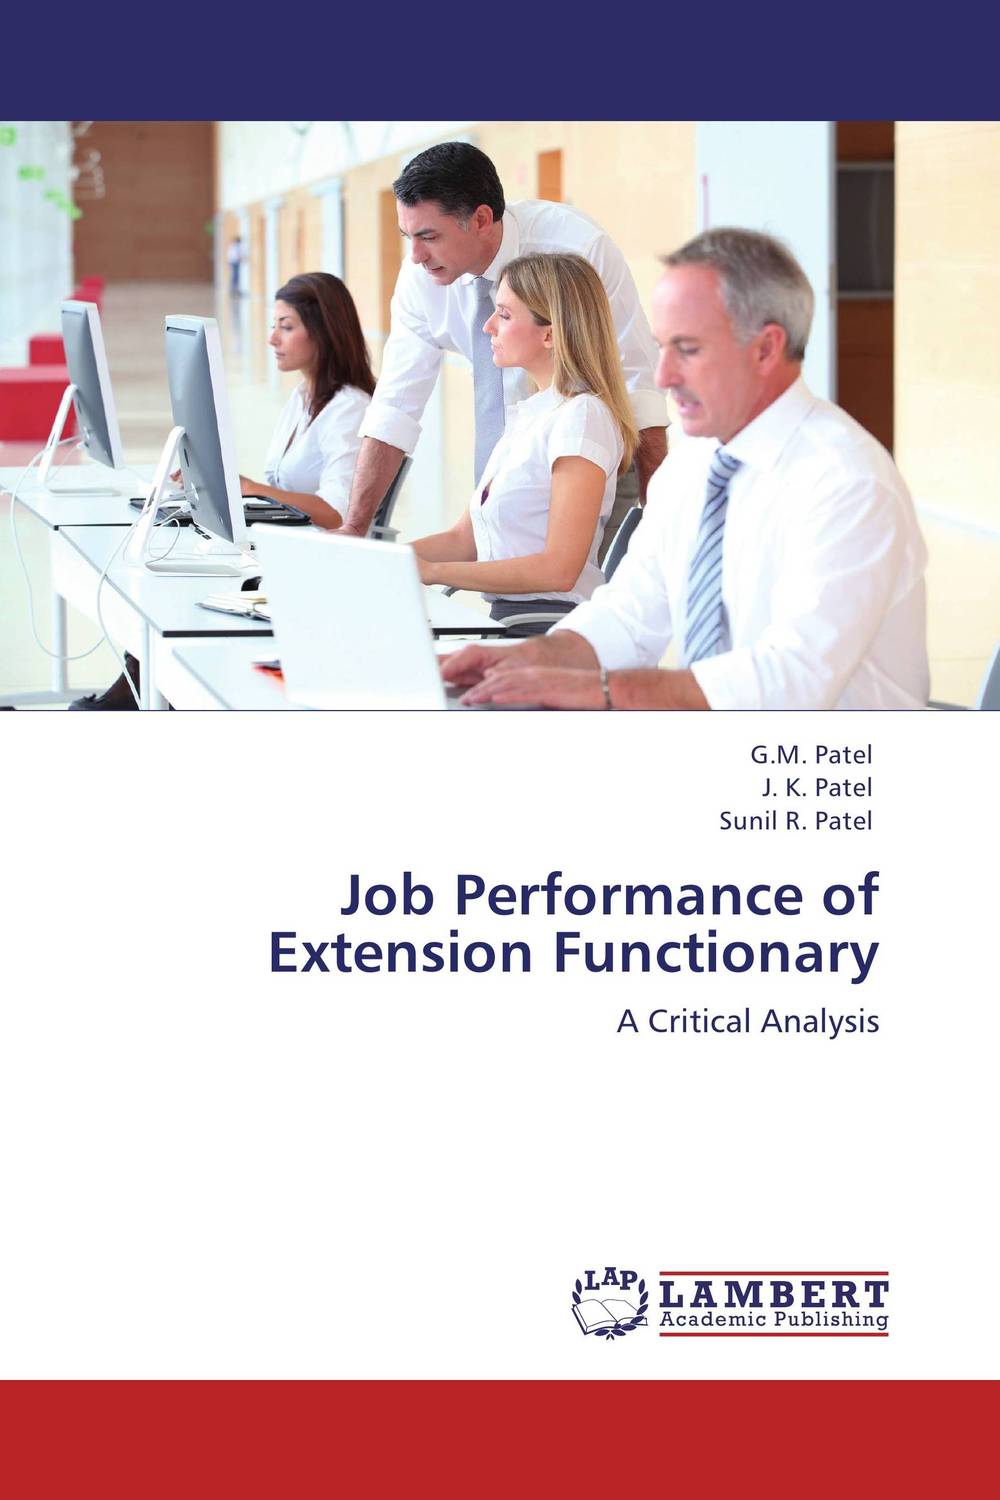 Job Performance of Extension Functionary